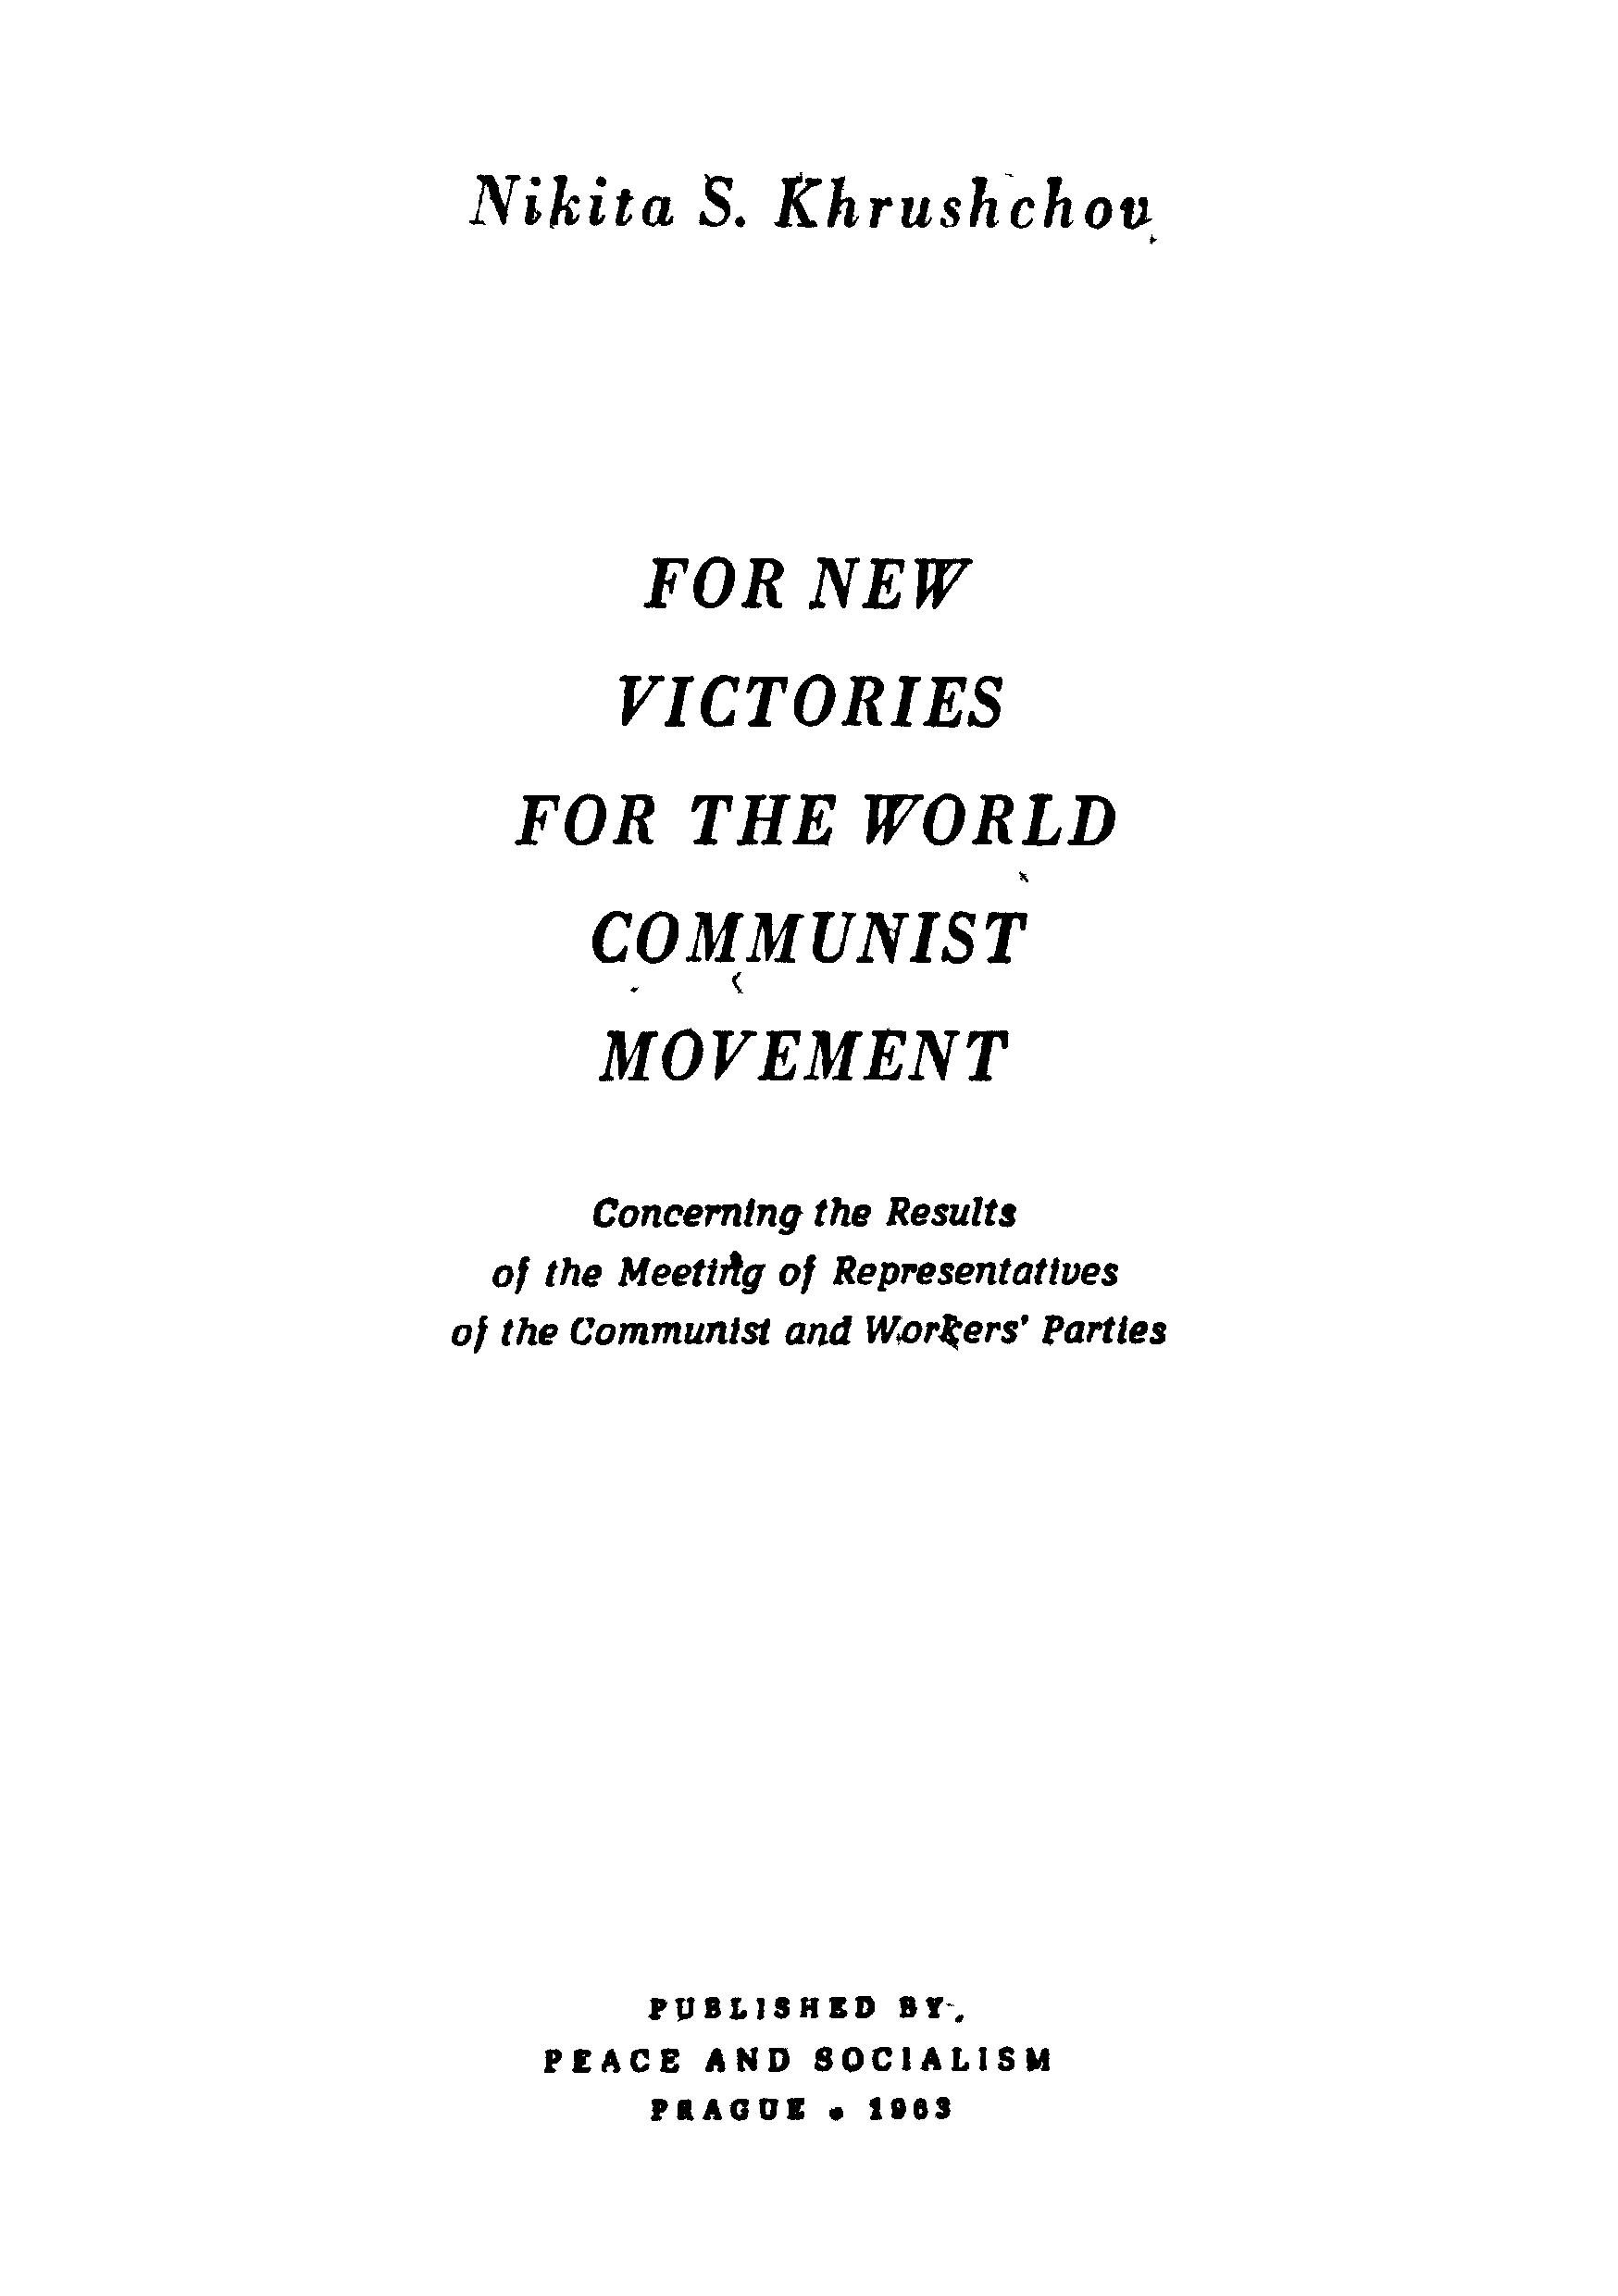 FOR NEW VICTORIES FOR THE WORLD COMMUNIST MOVEMENT